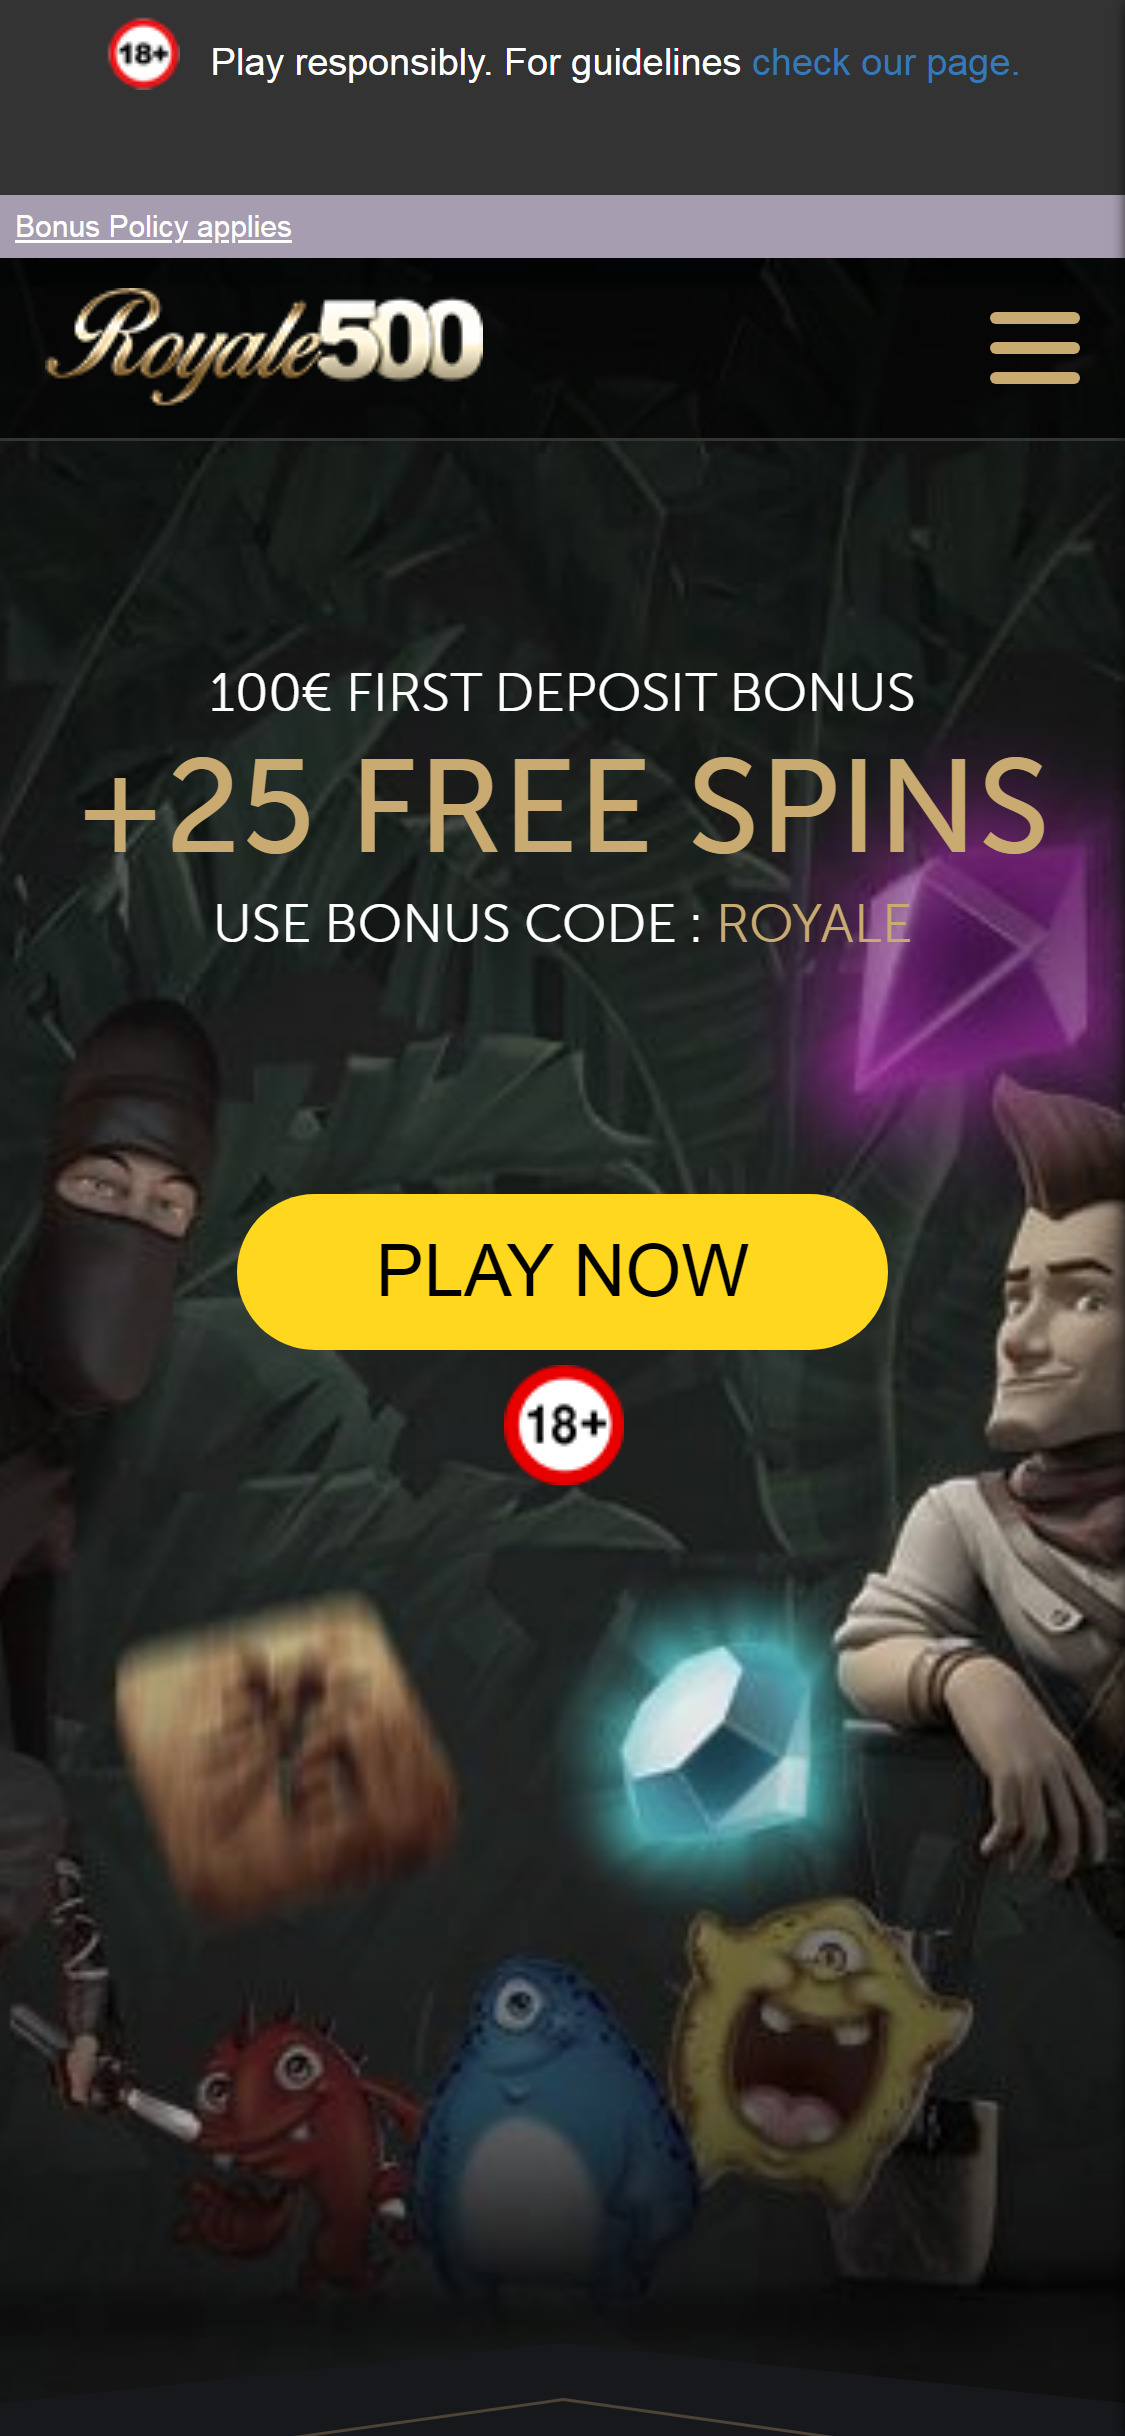 Royale500 Casino Mobile Login Review